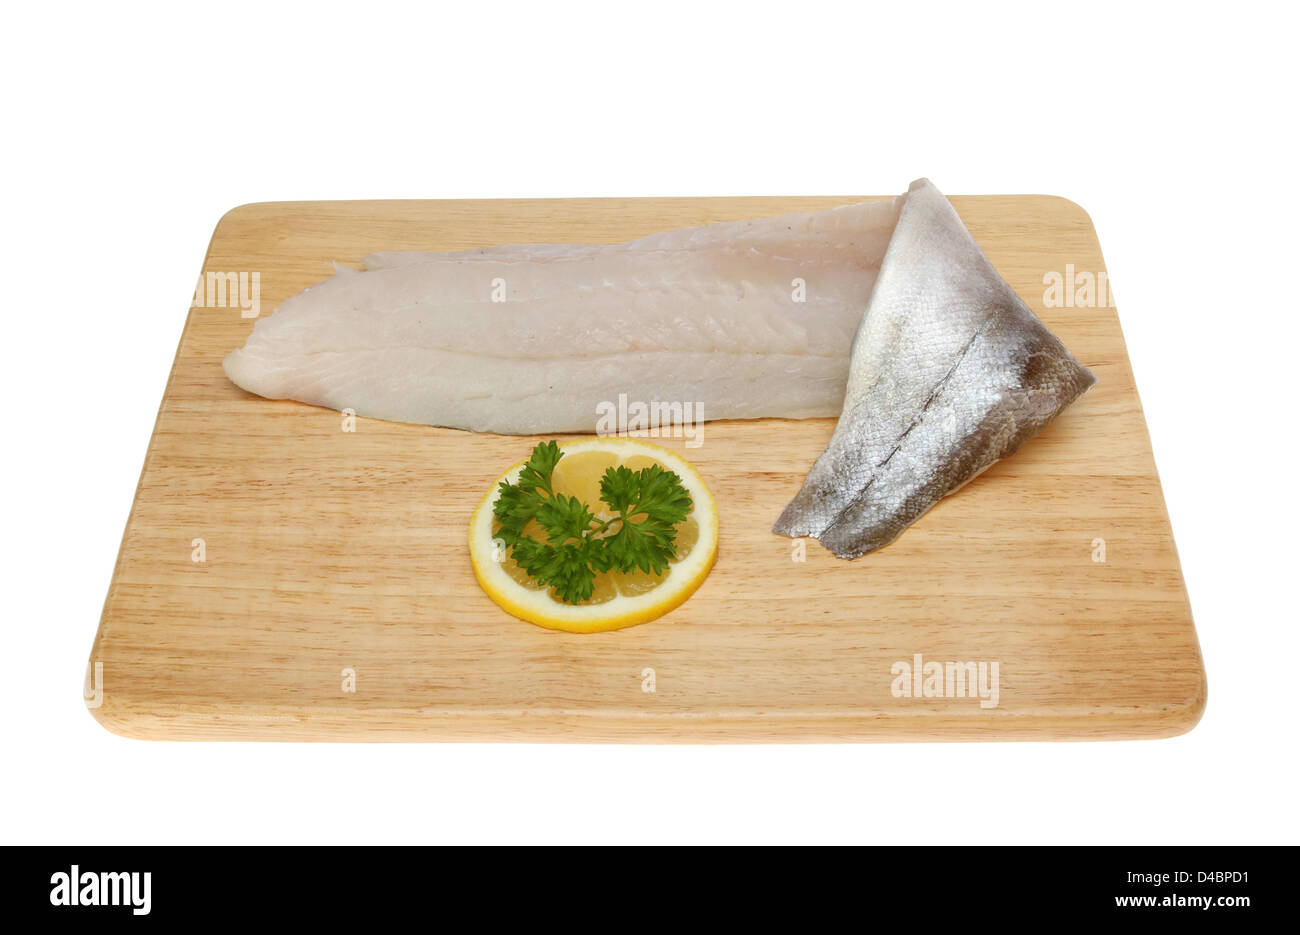 Pollock fish fillet on a wooden board isolated against white Stock Photo